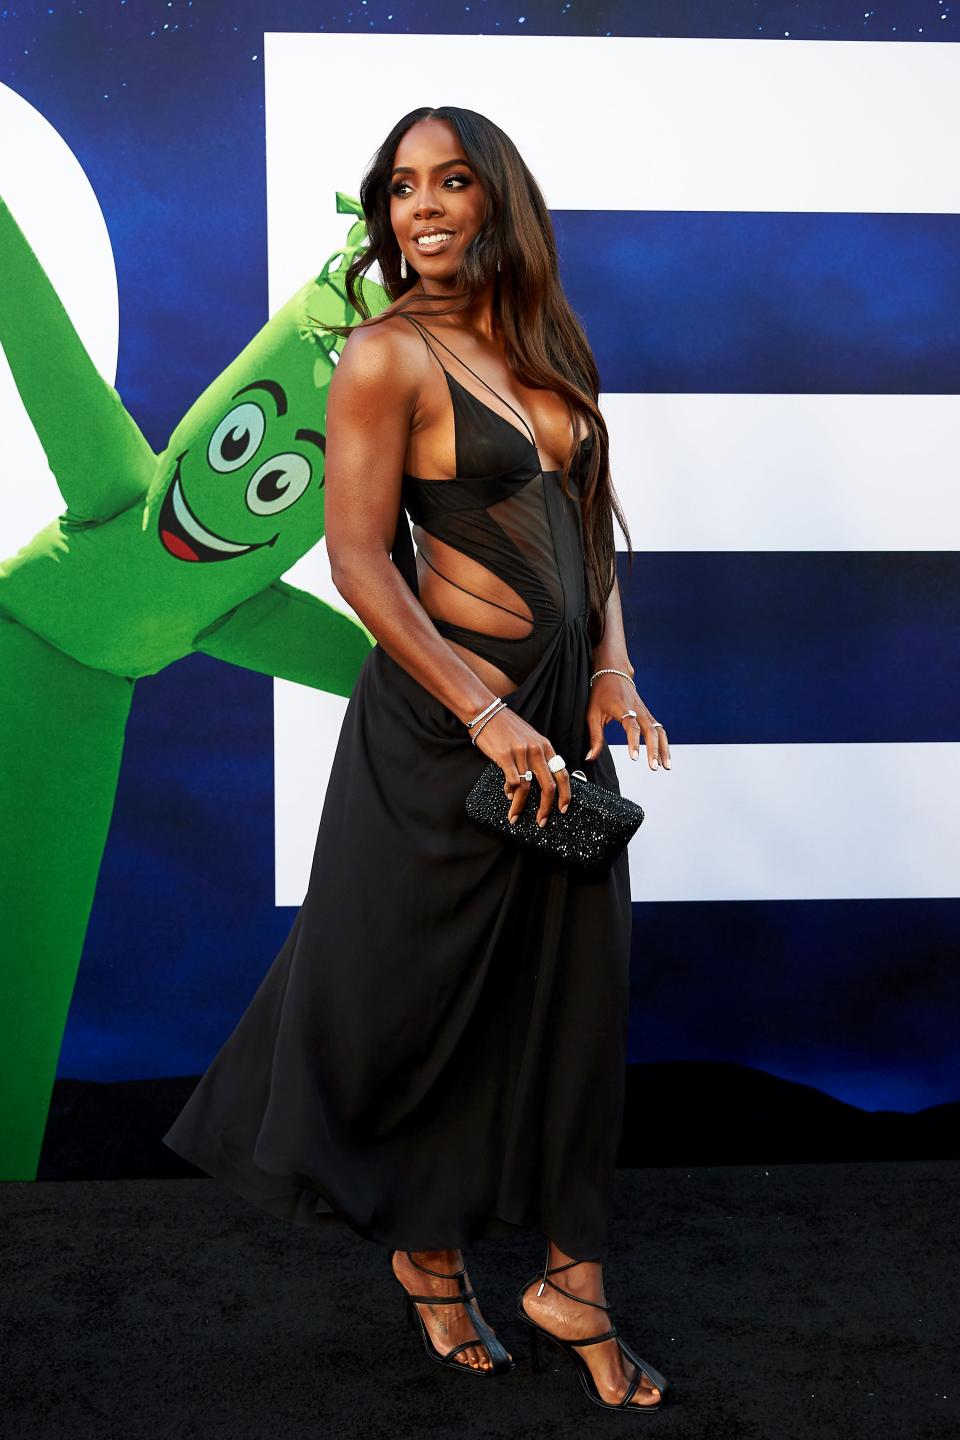 Kelly Rowland attends the world premiere of Universal Pictures' "NOPE" in Hollywood, California.